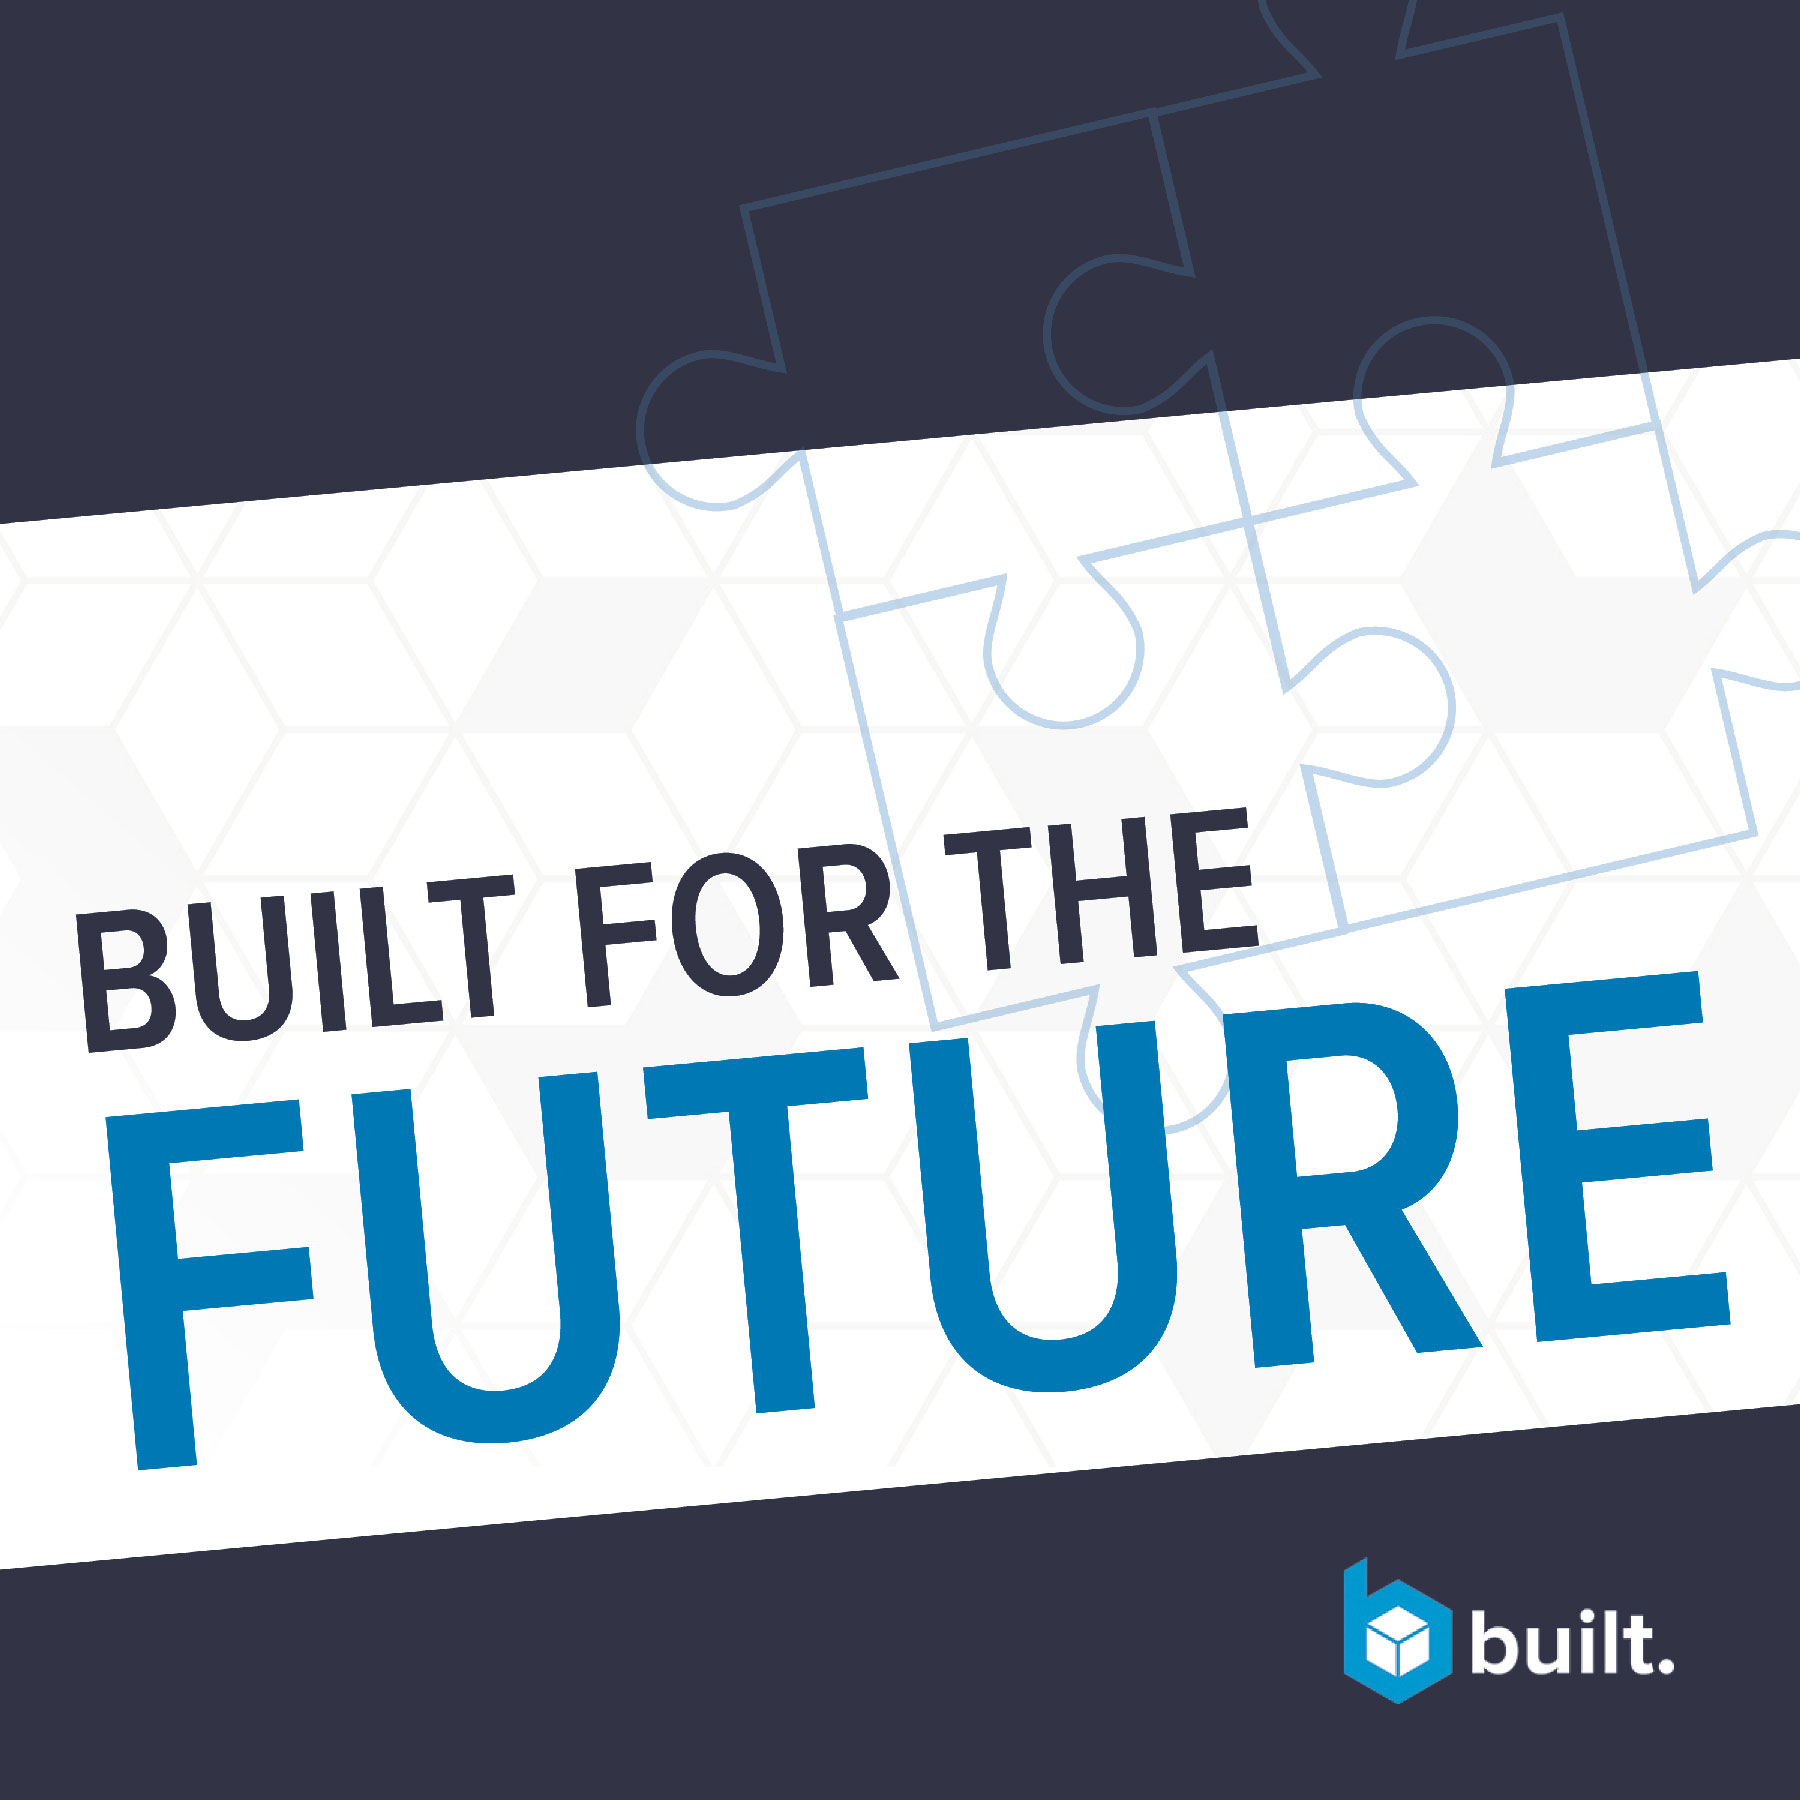 Built for the Future